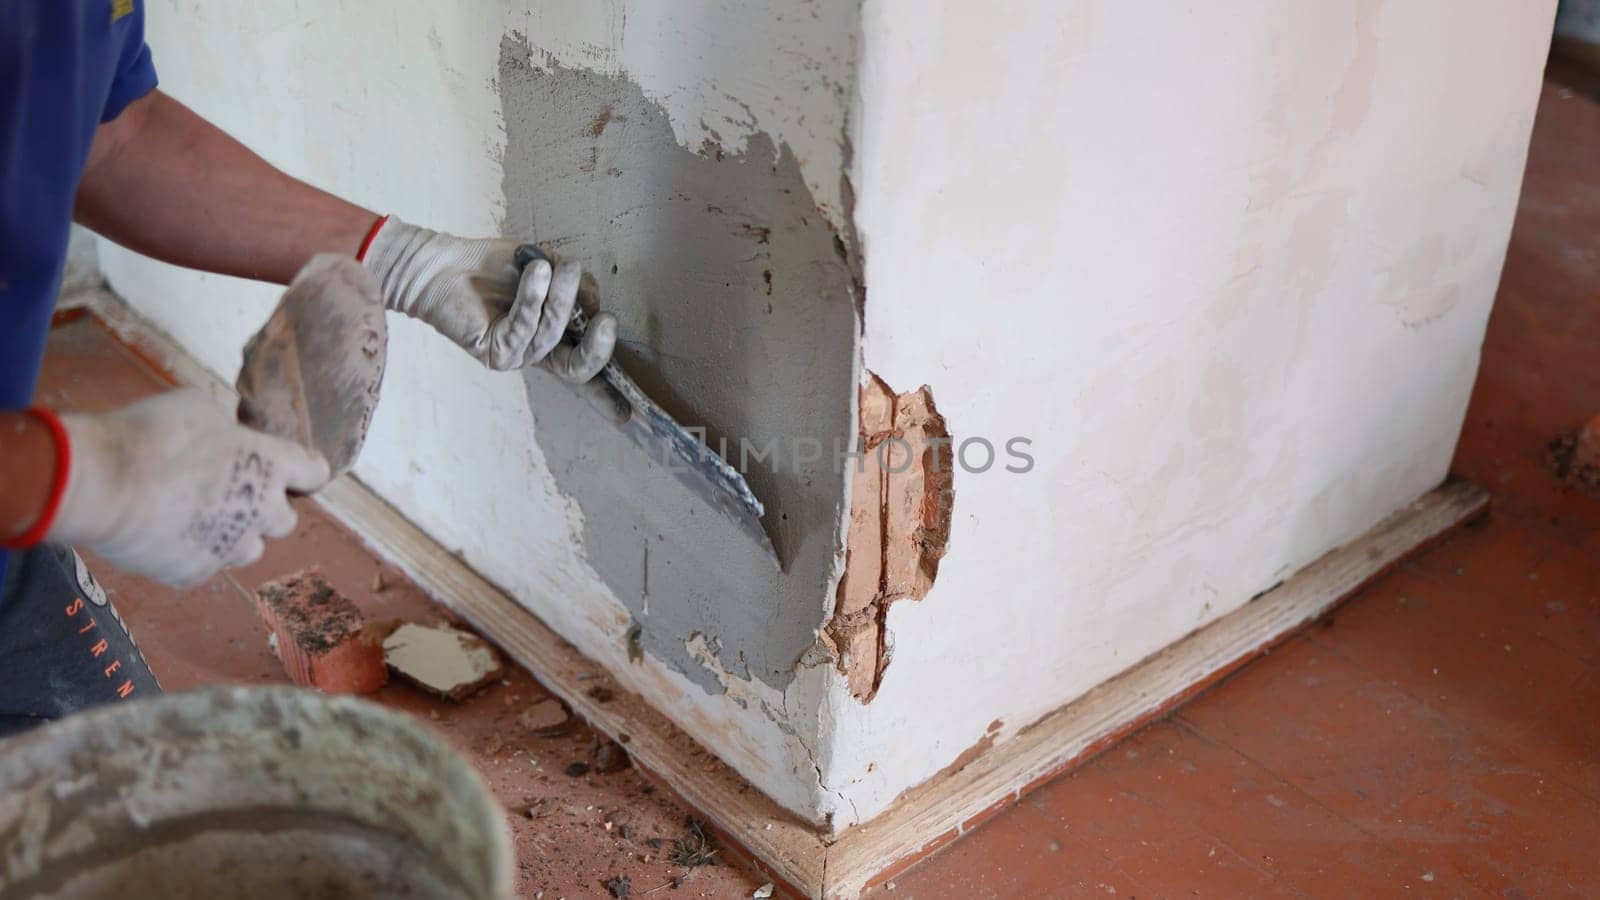 The stove painter is plastering the wall of the stove. by DovidPro